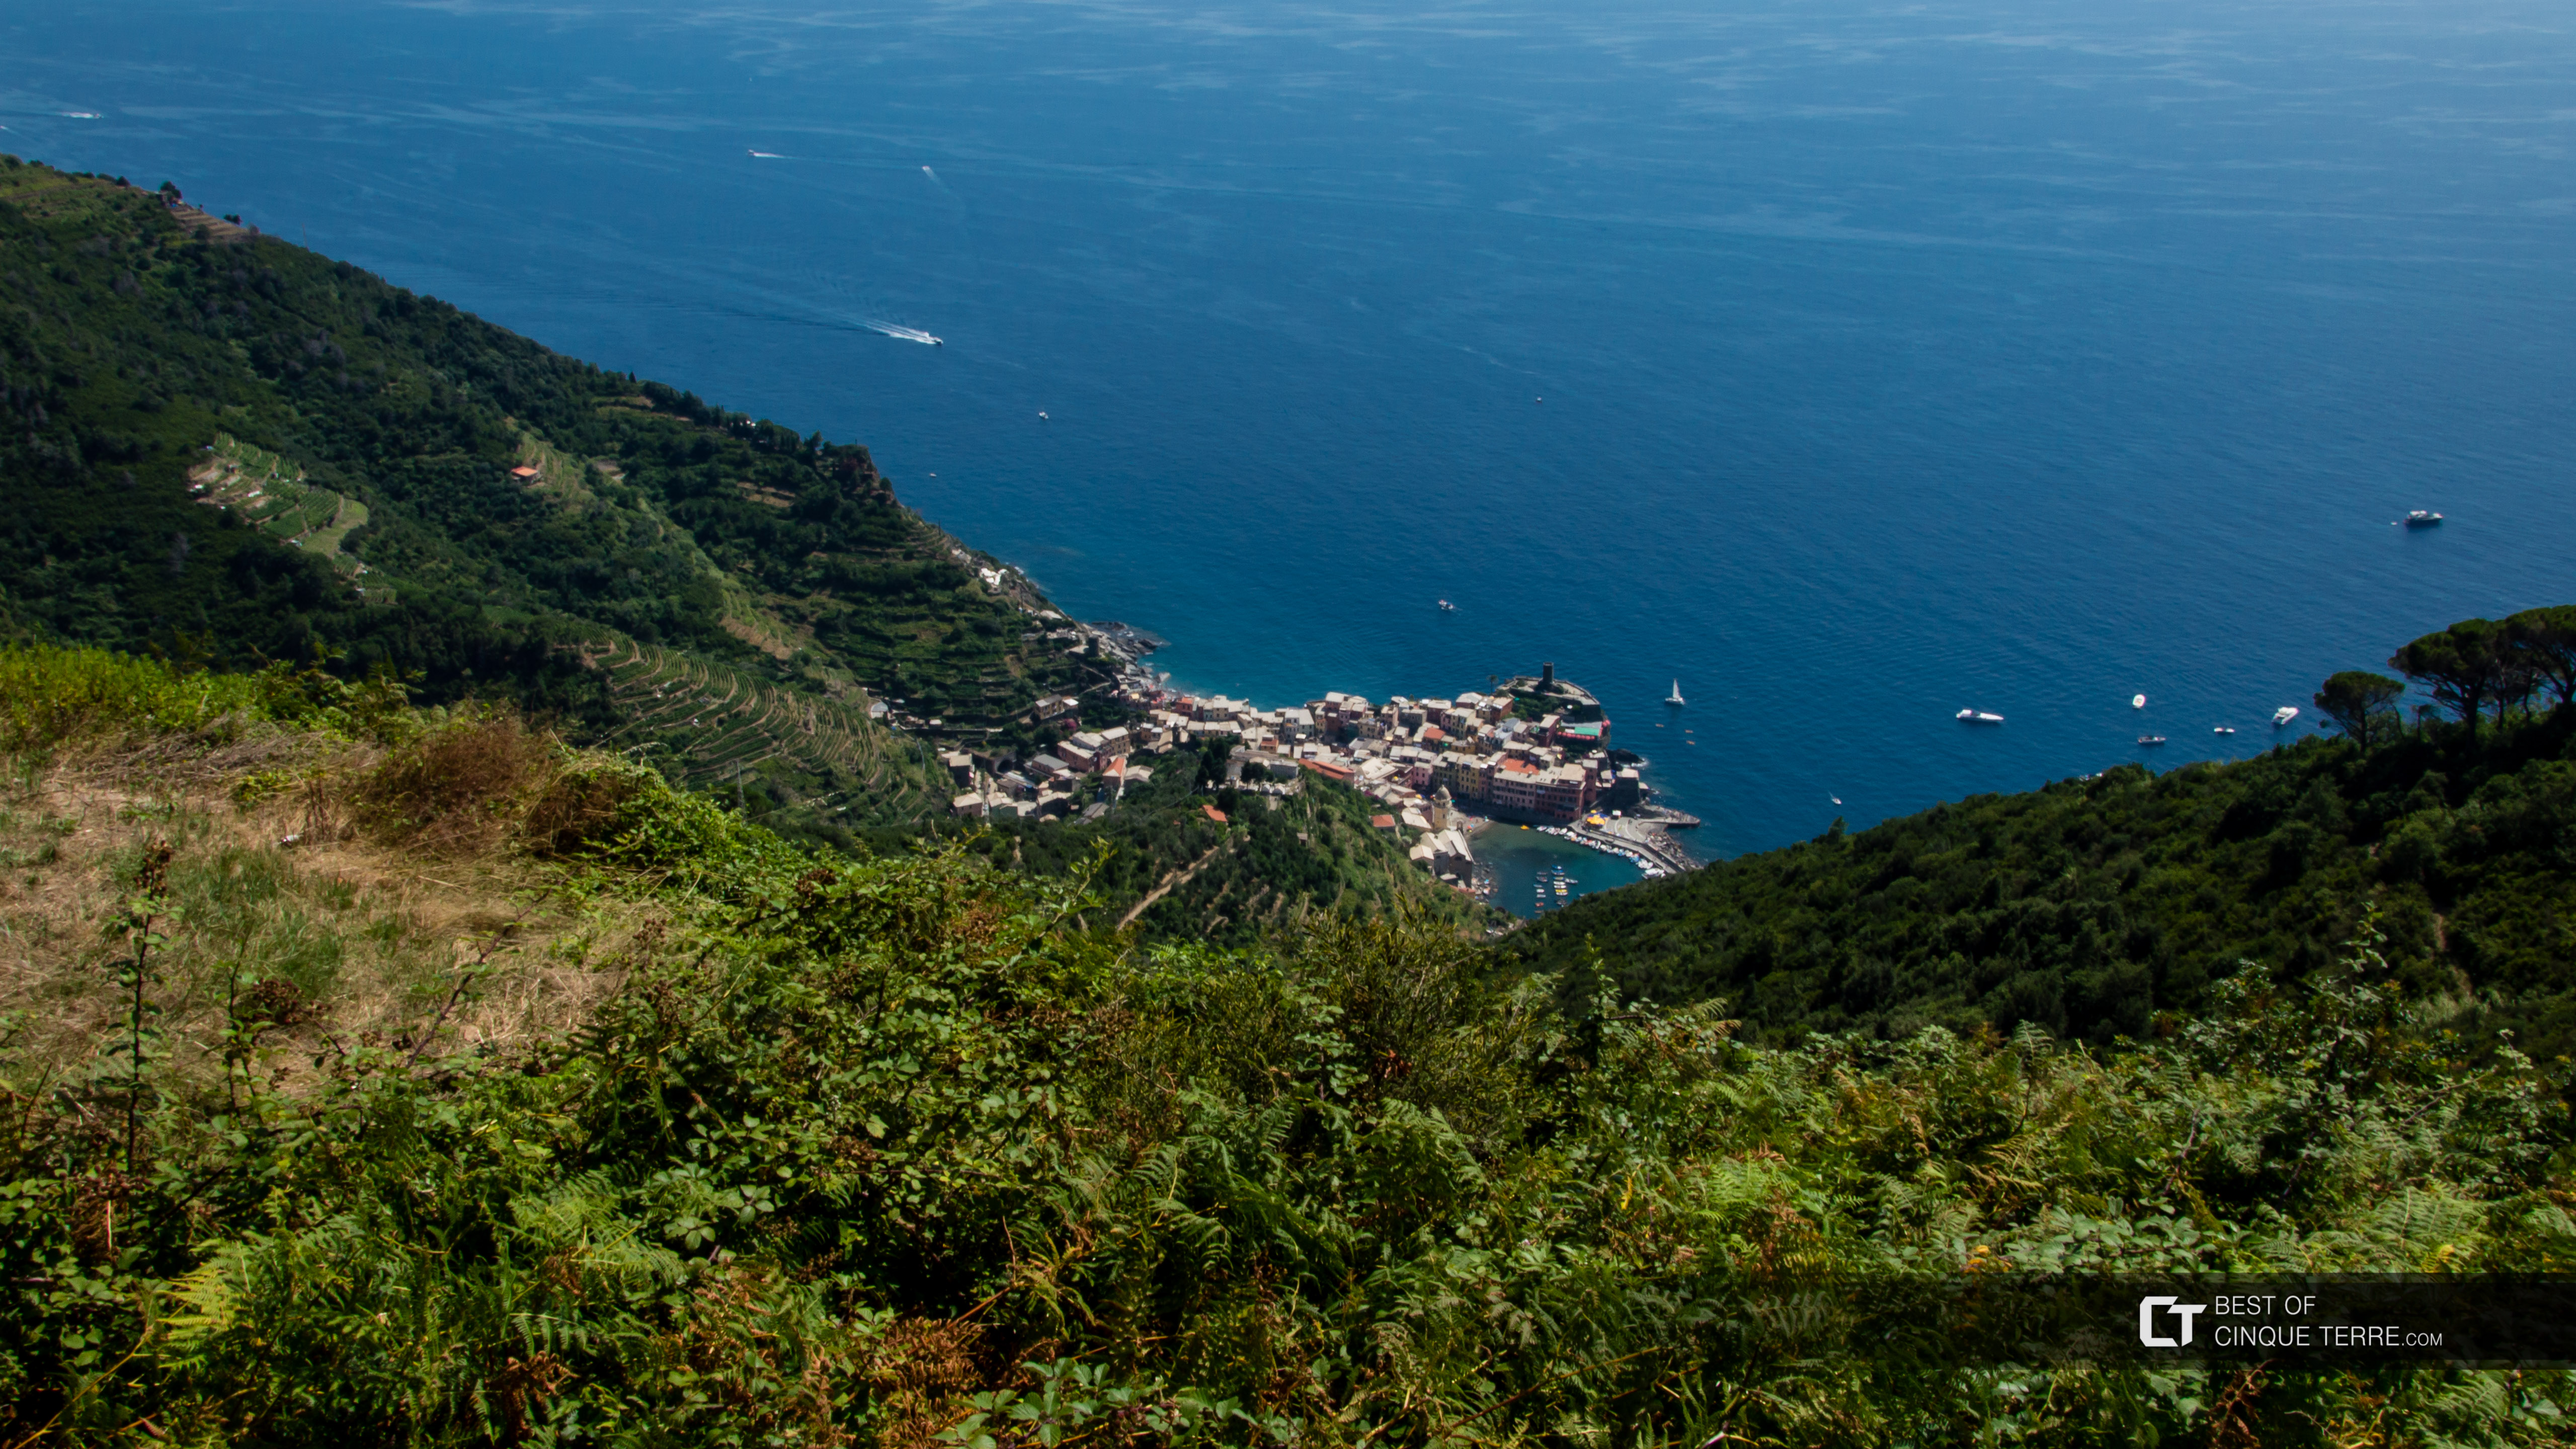 View of Vernazza from the long route Monterosso - Vernazza, Trails, Cinque Terre, Italy